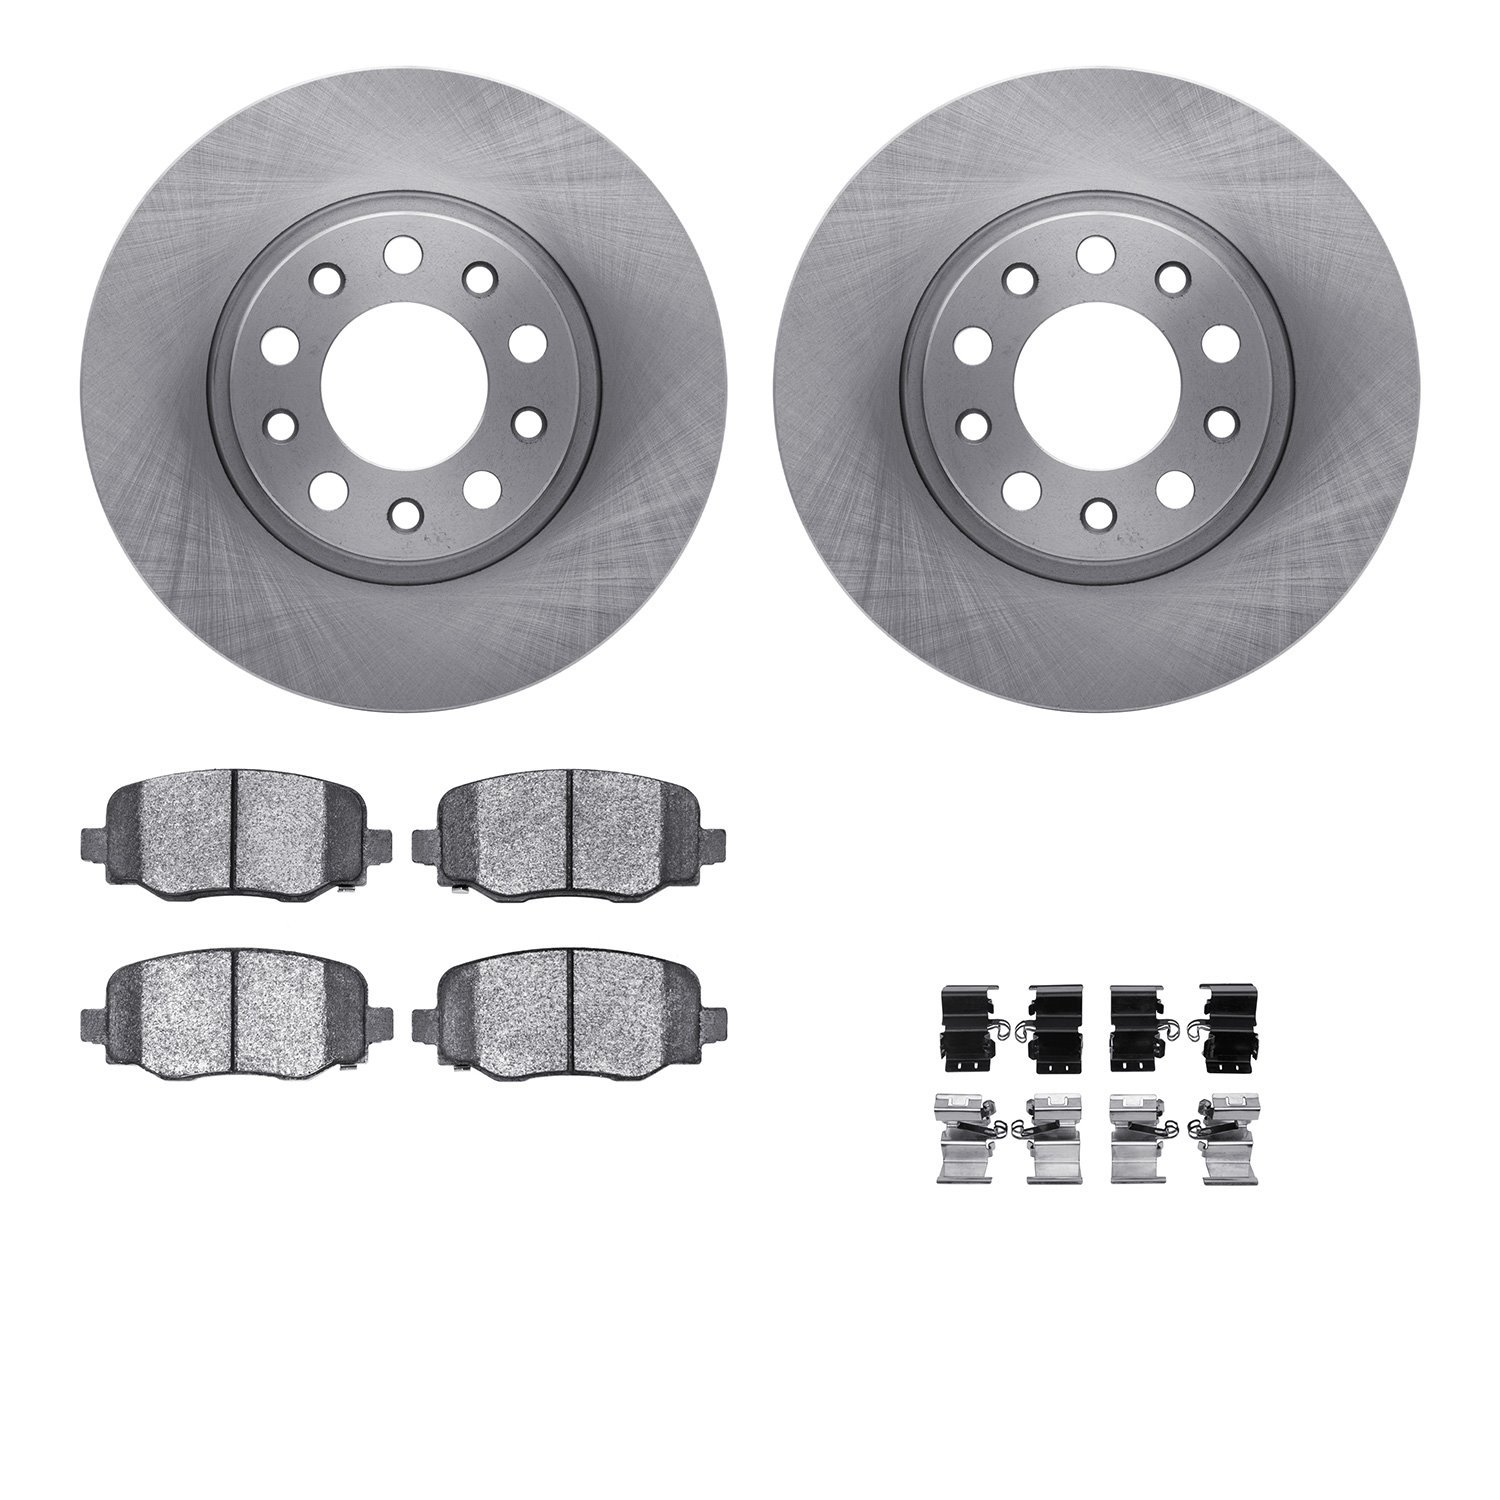 6312-42049 Brake Rotors with 3000-Series Ceramic Brake Pads Kit with Hardware, Fits Select Mopar, Position: Rear